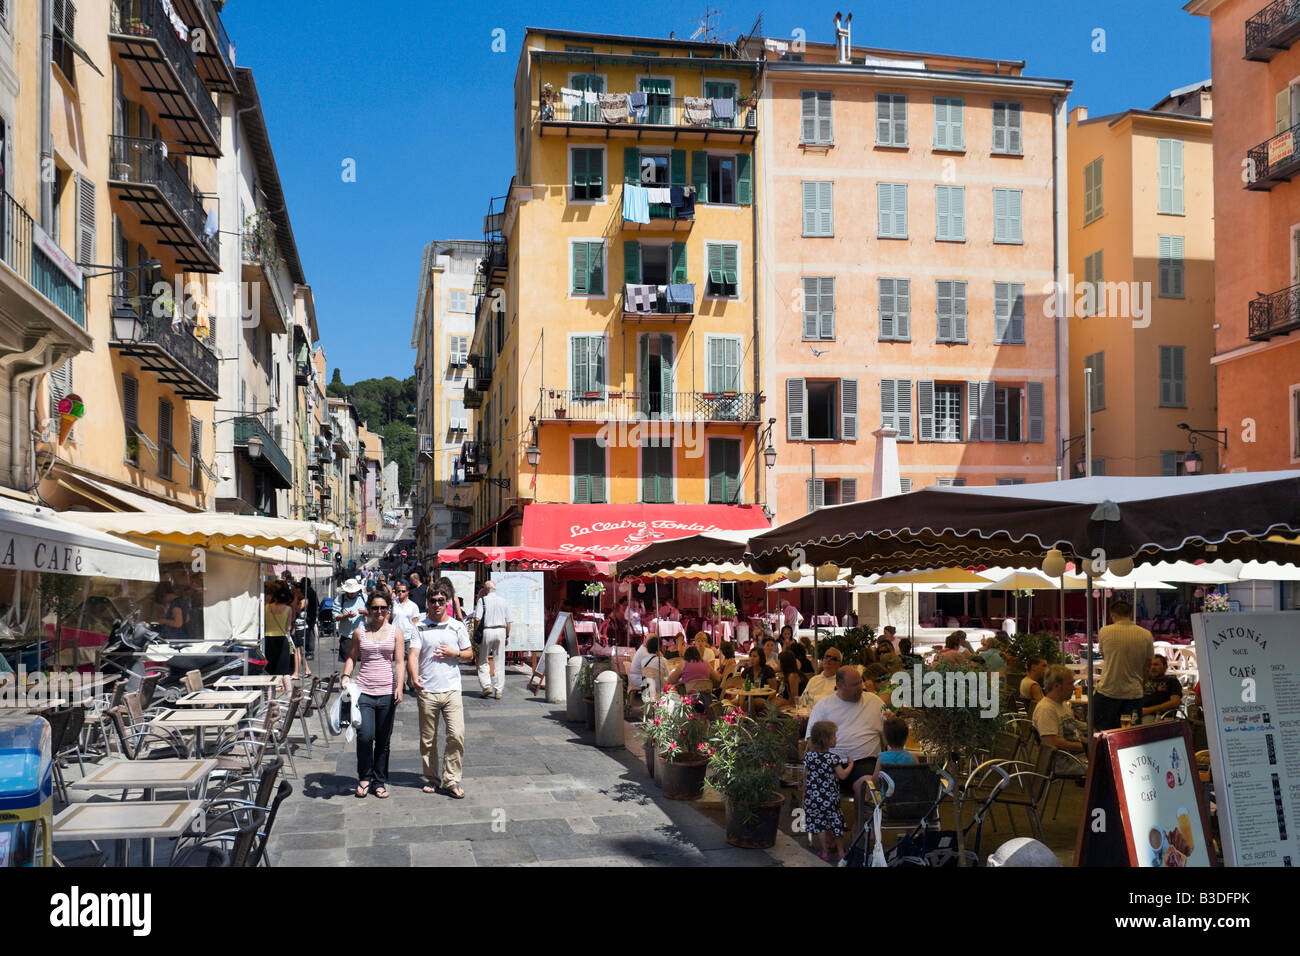 Cafes and bars in Place Rossetti in the old town (Vieux Nice), Nice, Cote d'Azur, French Riviera, France Stock Photo